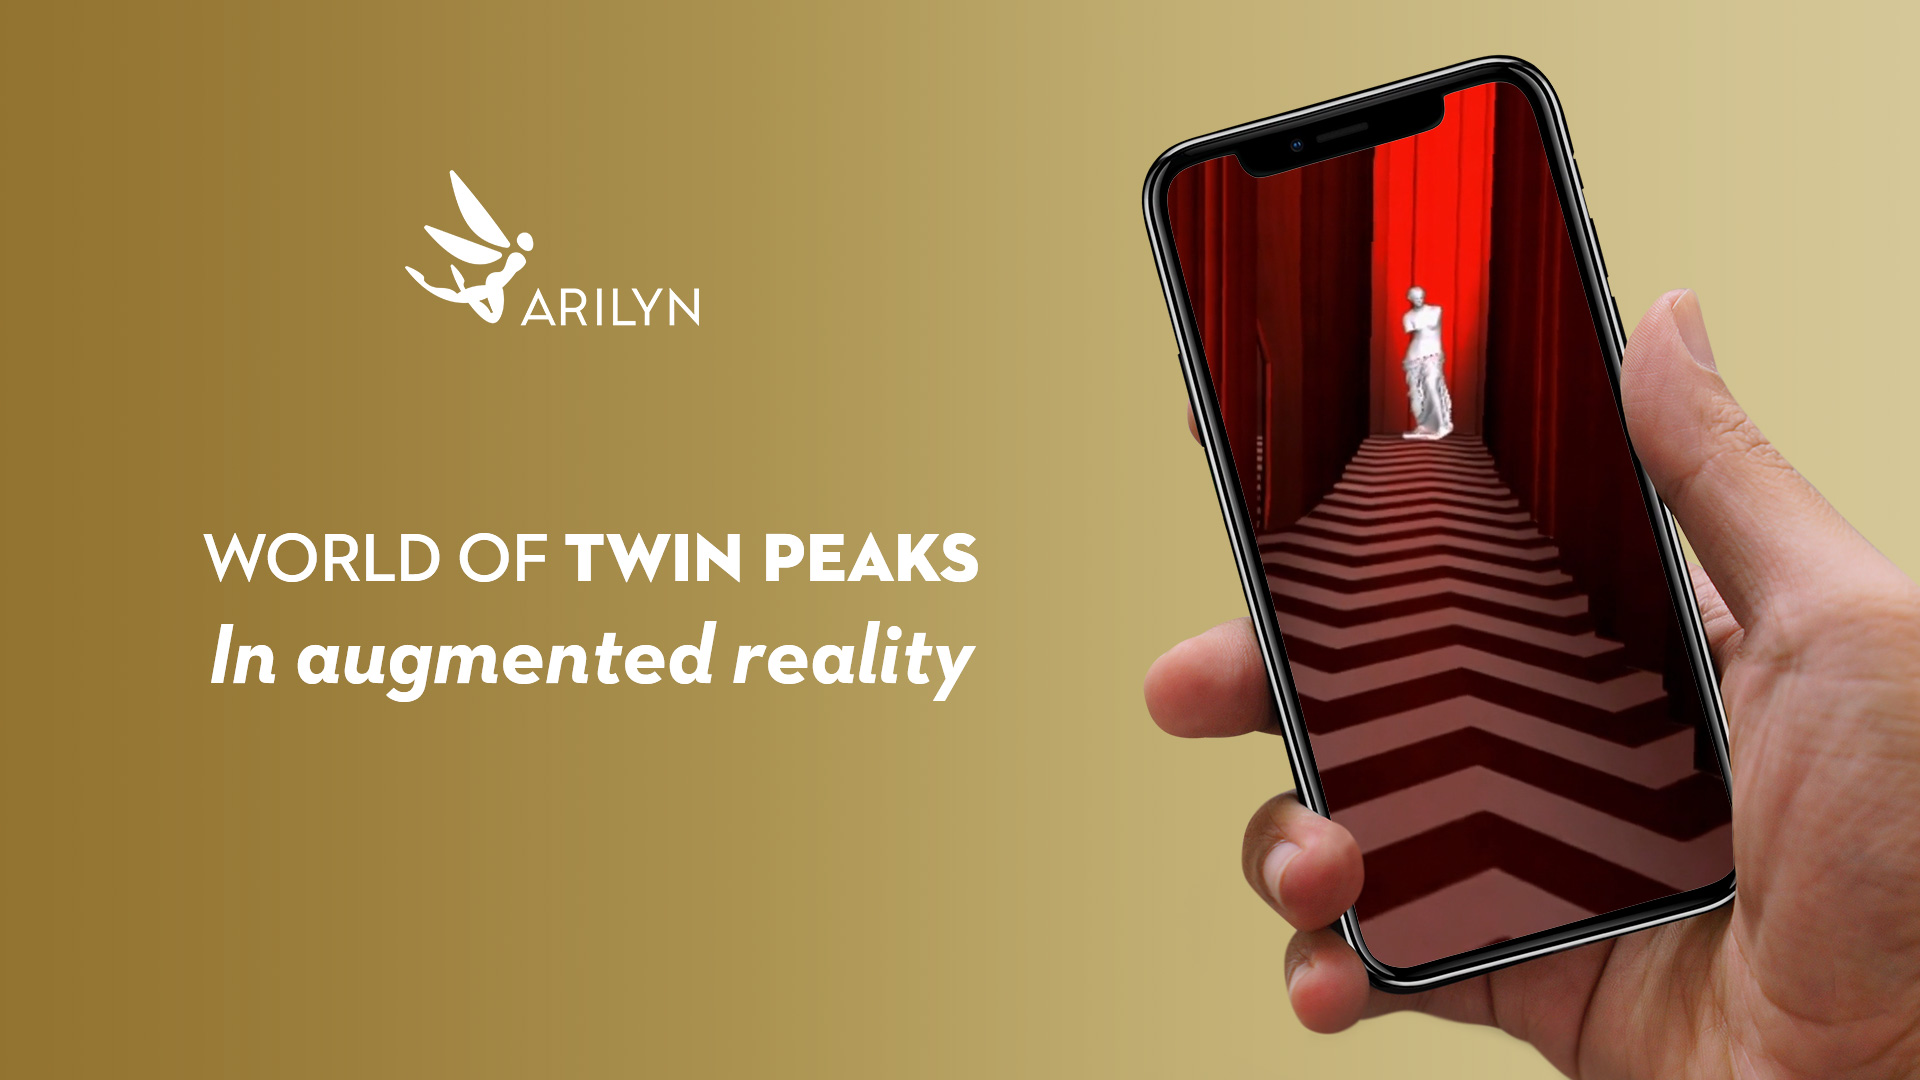 The world of Twin Peaks in augmented reality